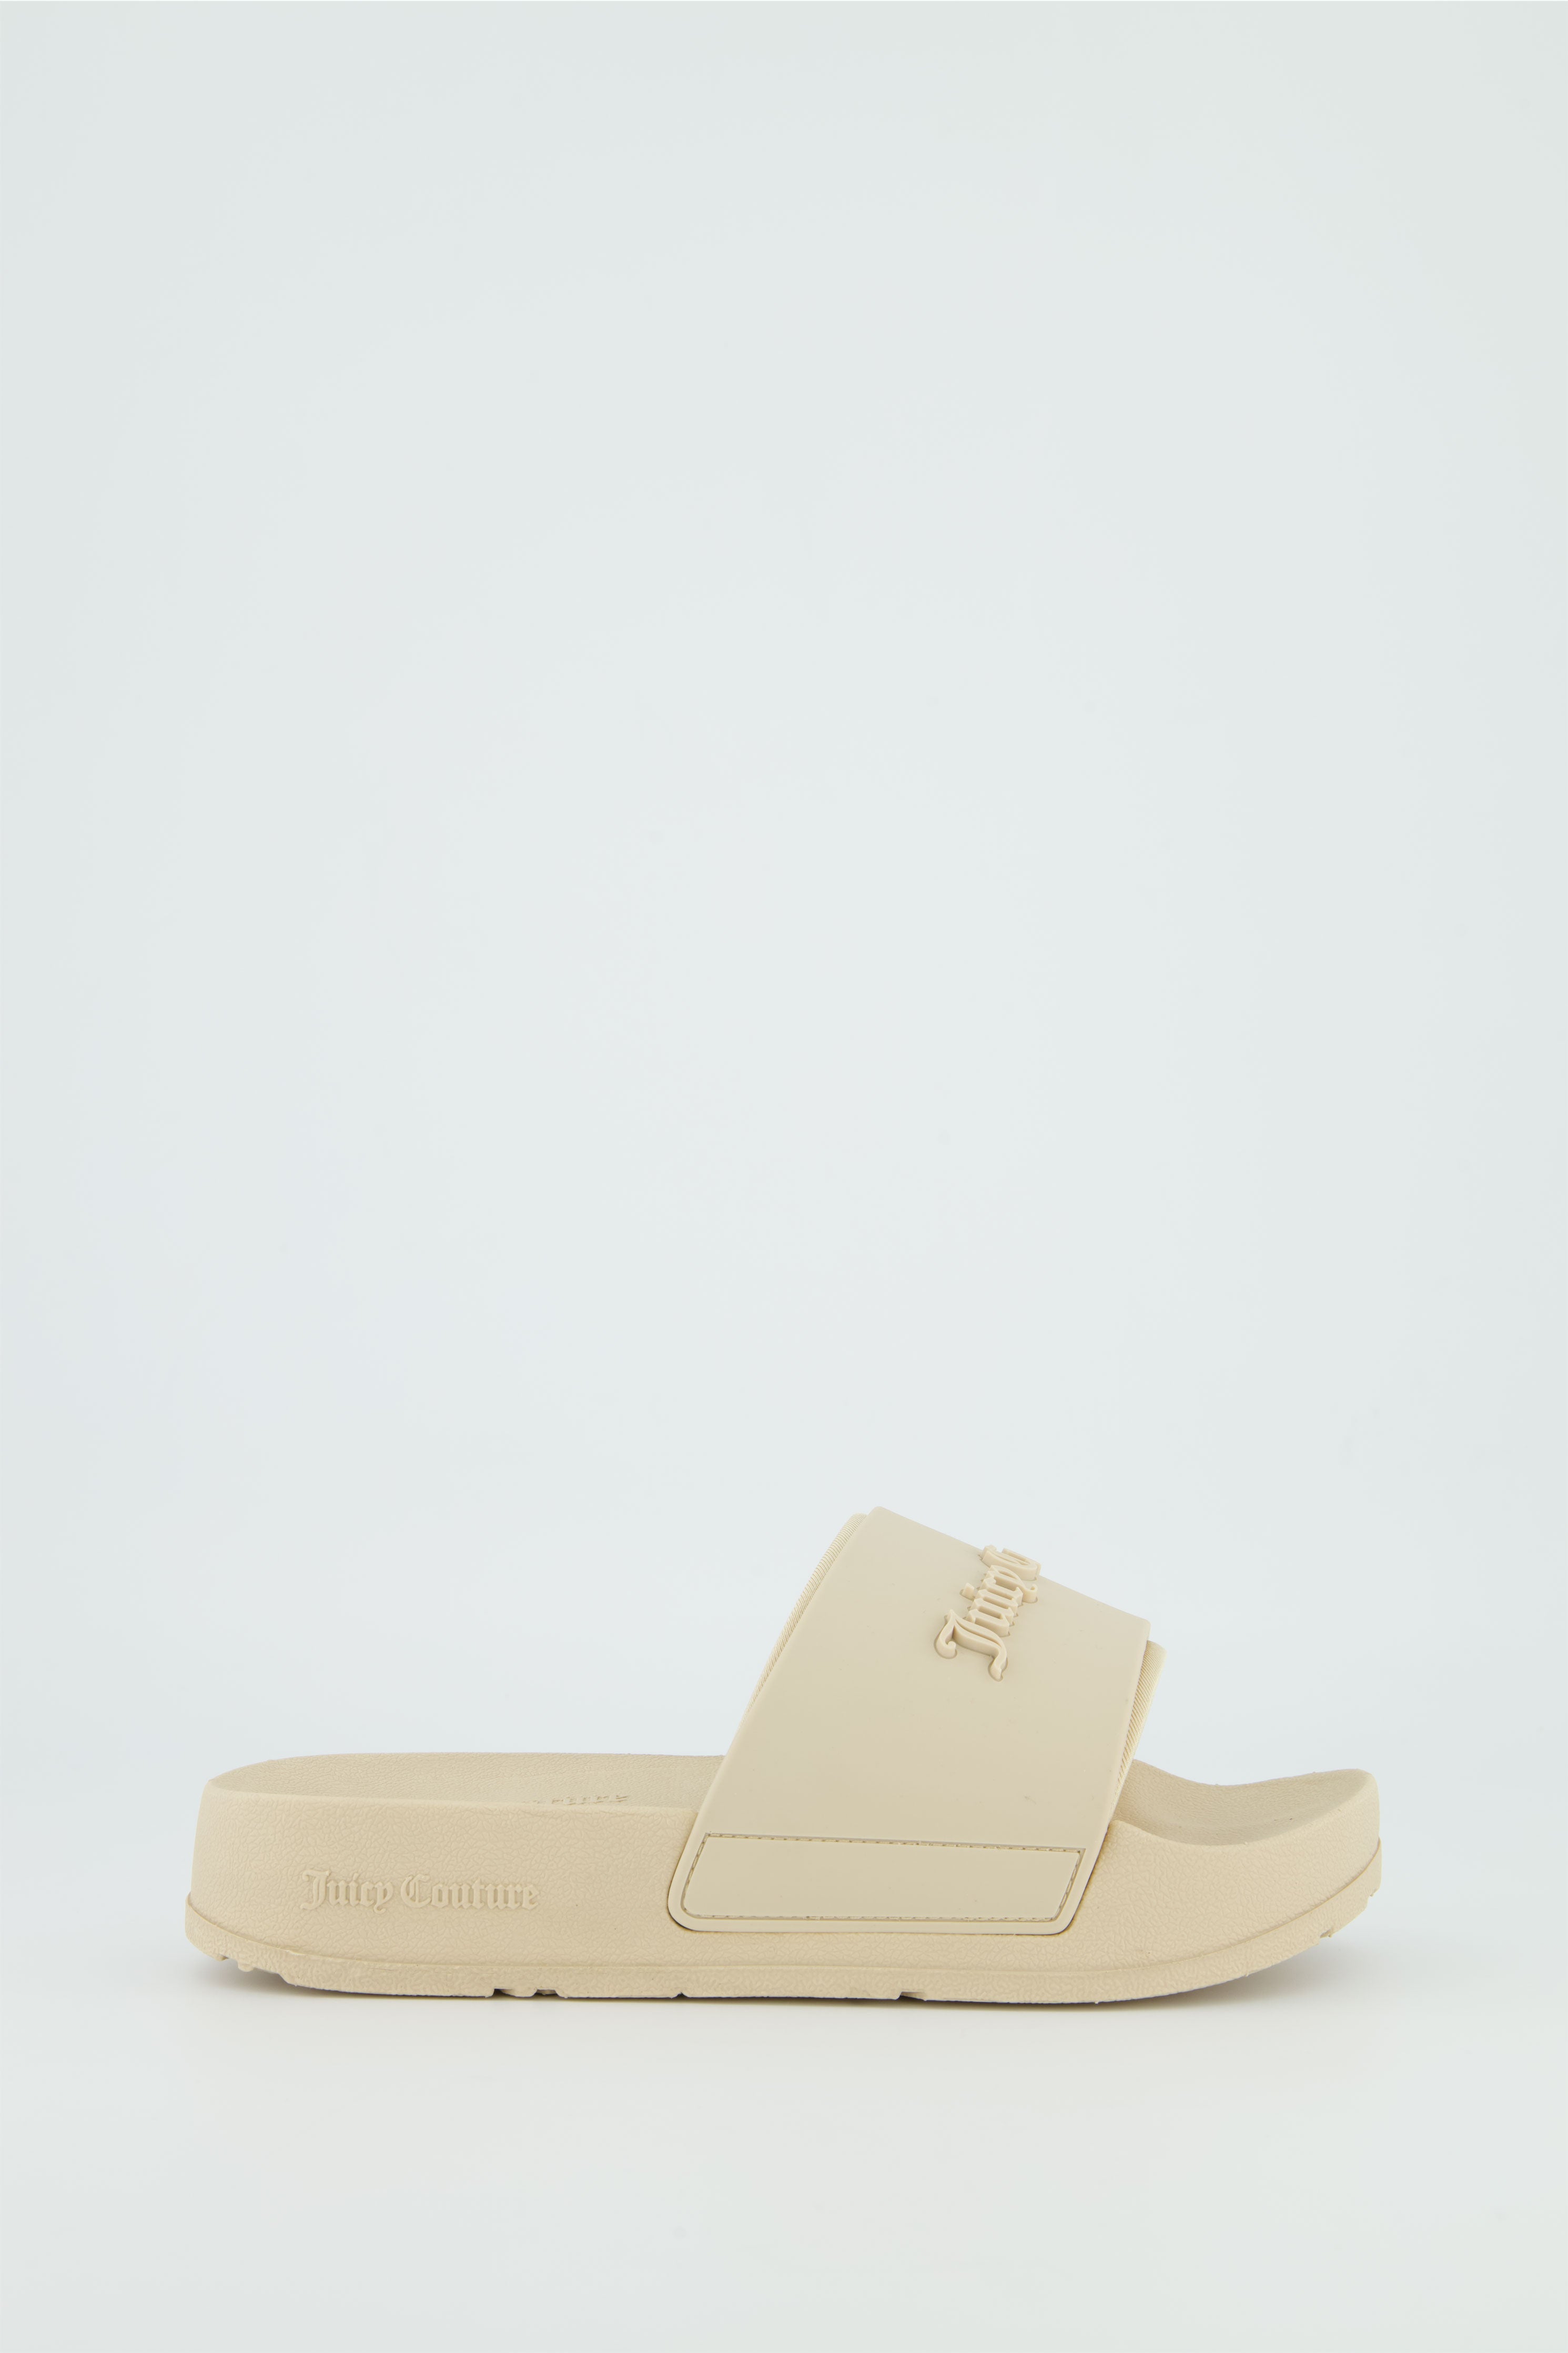 Women's Juicy Couture Brazilian Sand Stacked Sliders